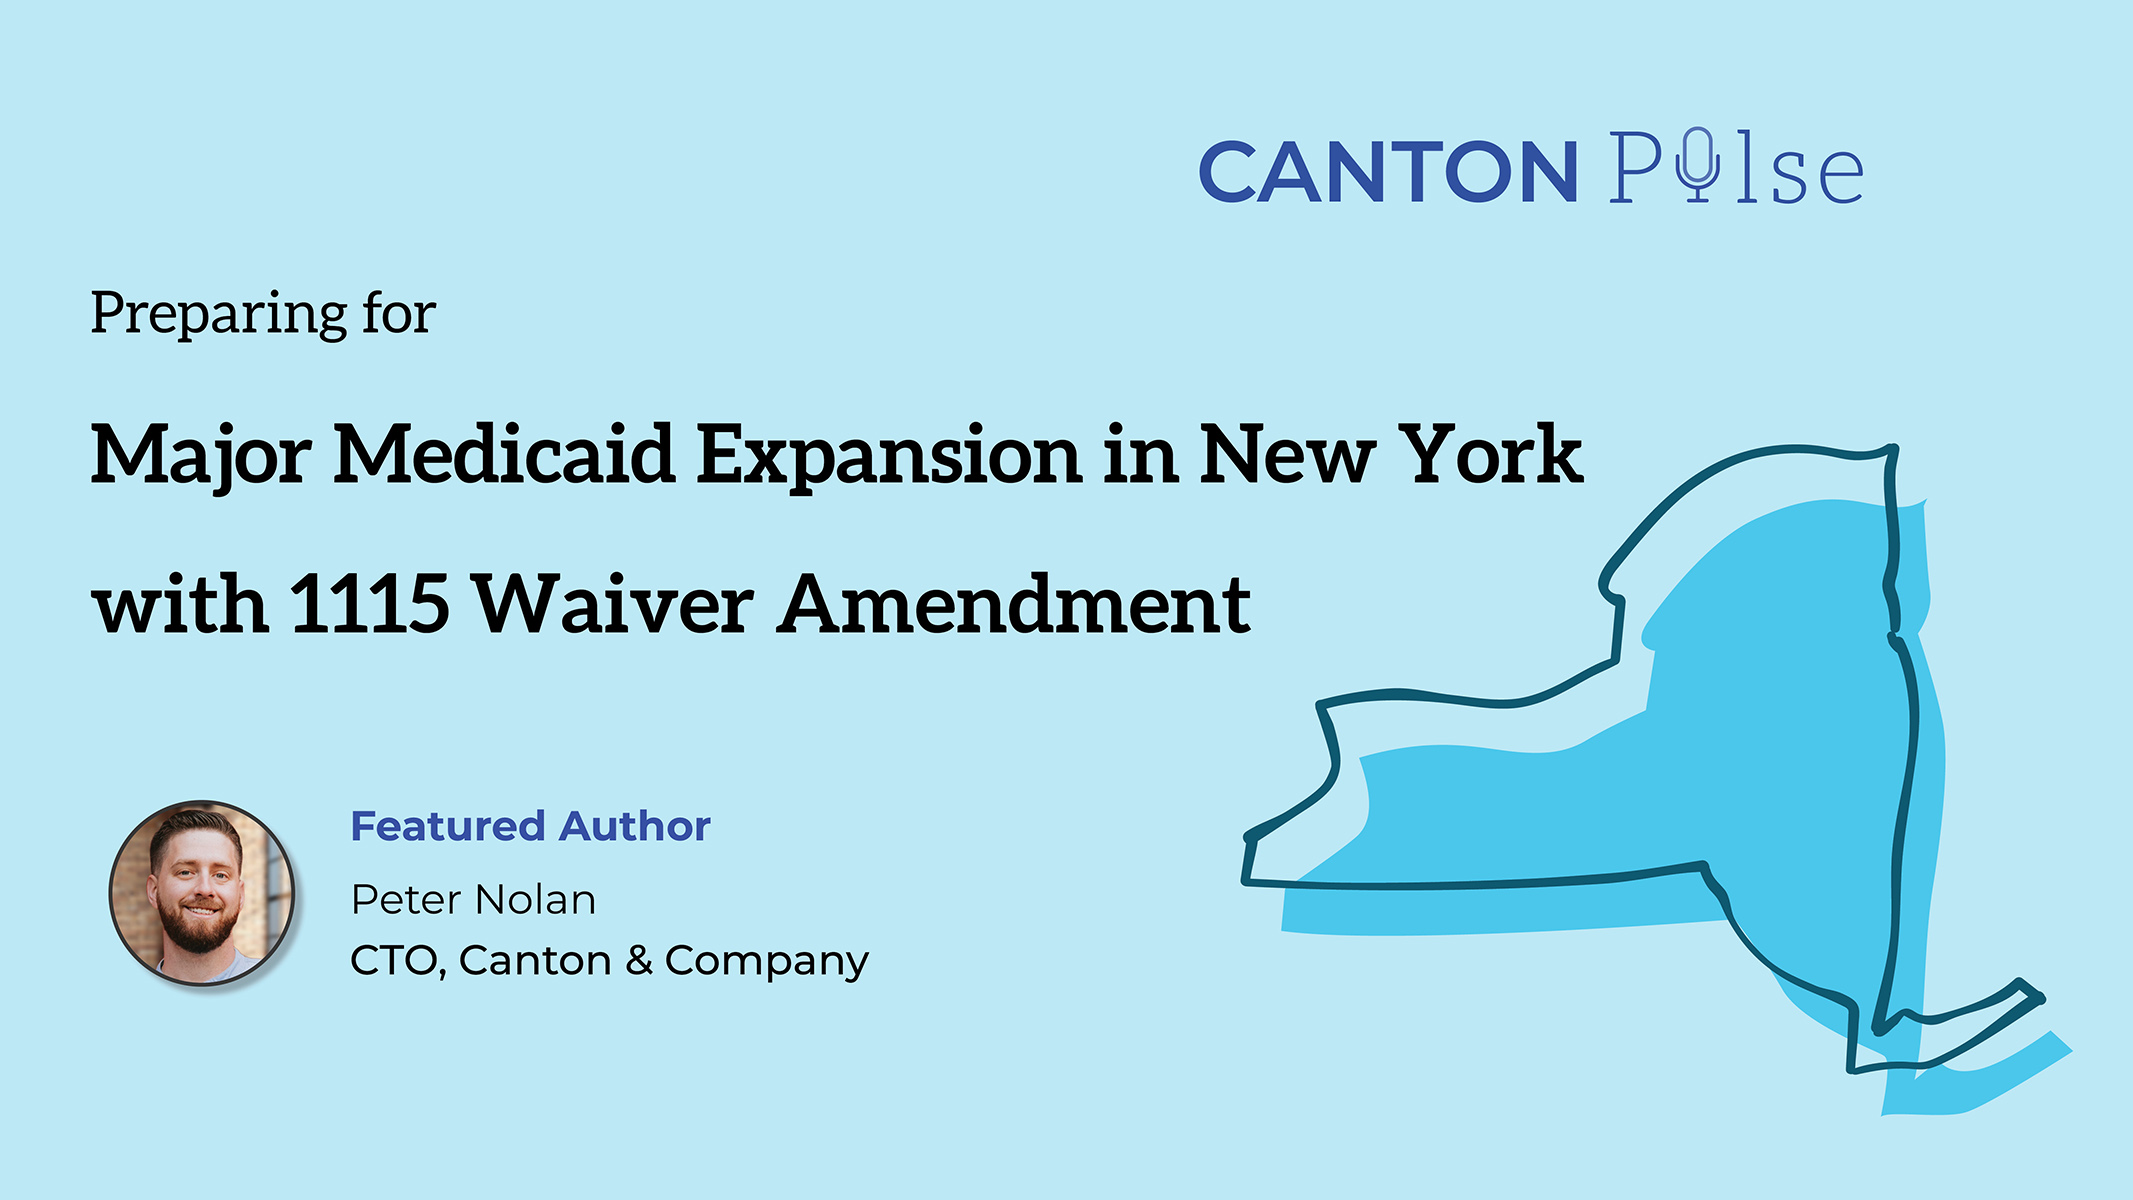 Preparing for Major Medicaid Expansion in New York with 1115 Waiver Amendment